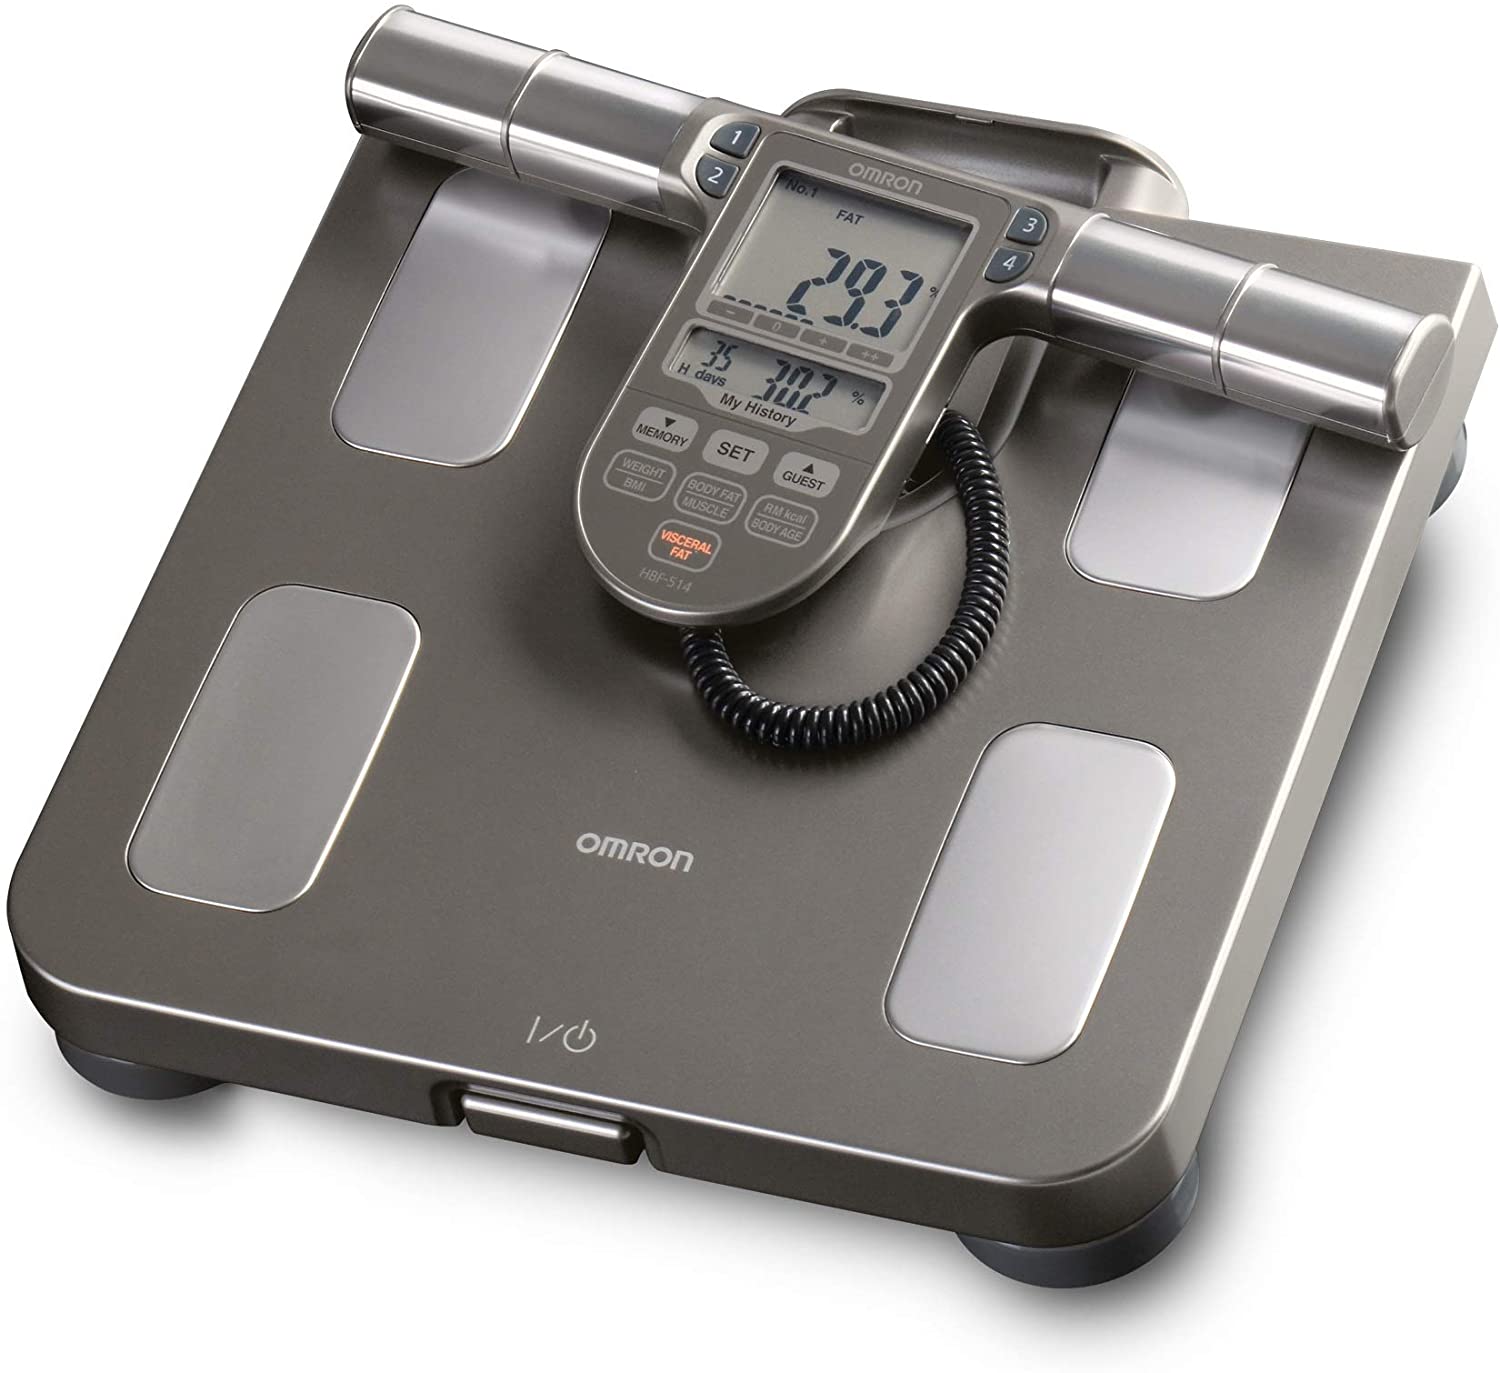 https://www.dontwasteyourmoney.com/wp-content/uploads/2020/05/omron-body-composition-monitor-7-fitness-indicators-bmi-scale-bmi-scale.jpg